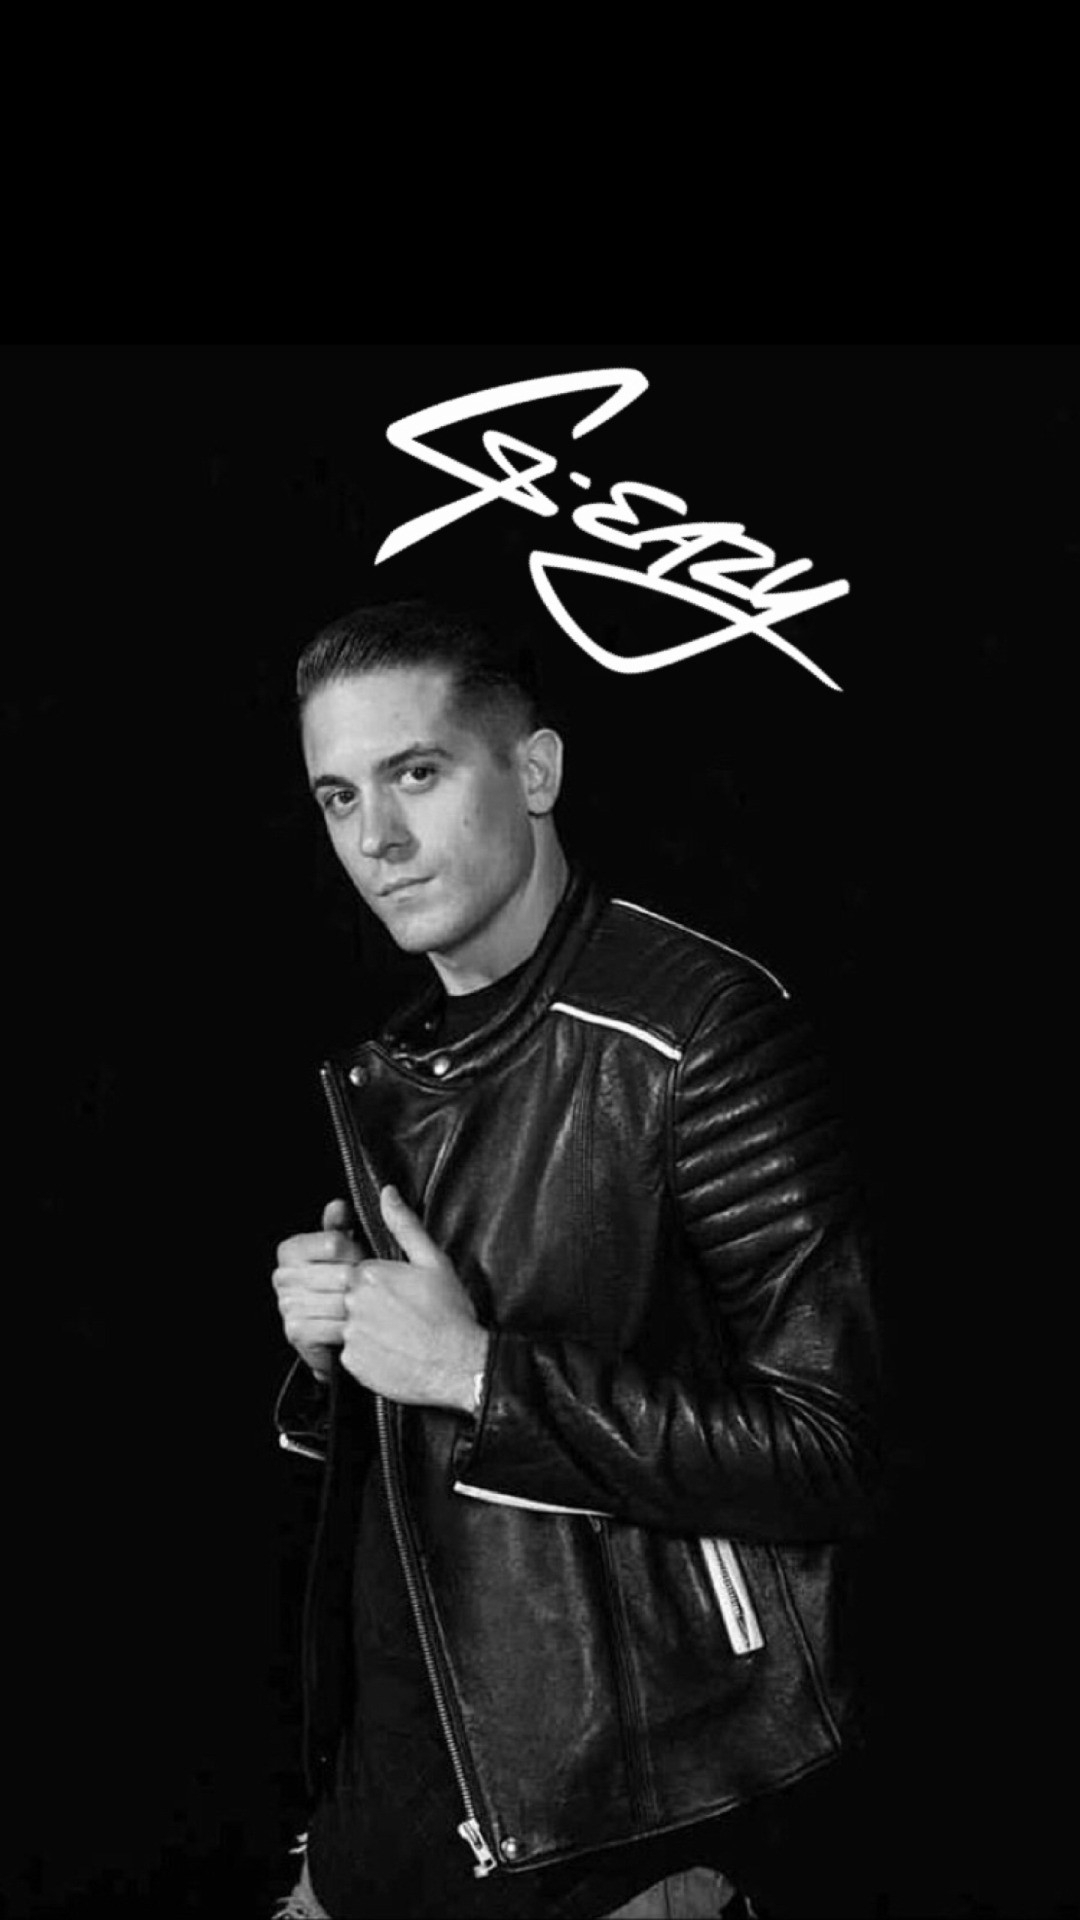 10 Best G Eazy Wallpaper Iphone FULL HD 1080p For PC Background